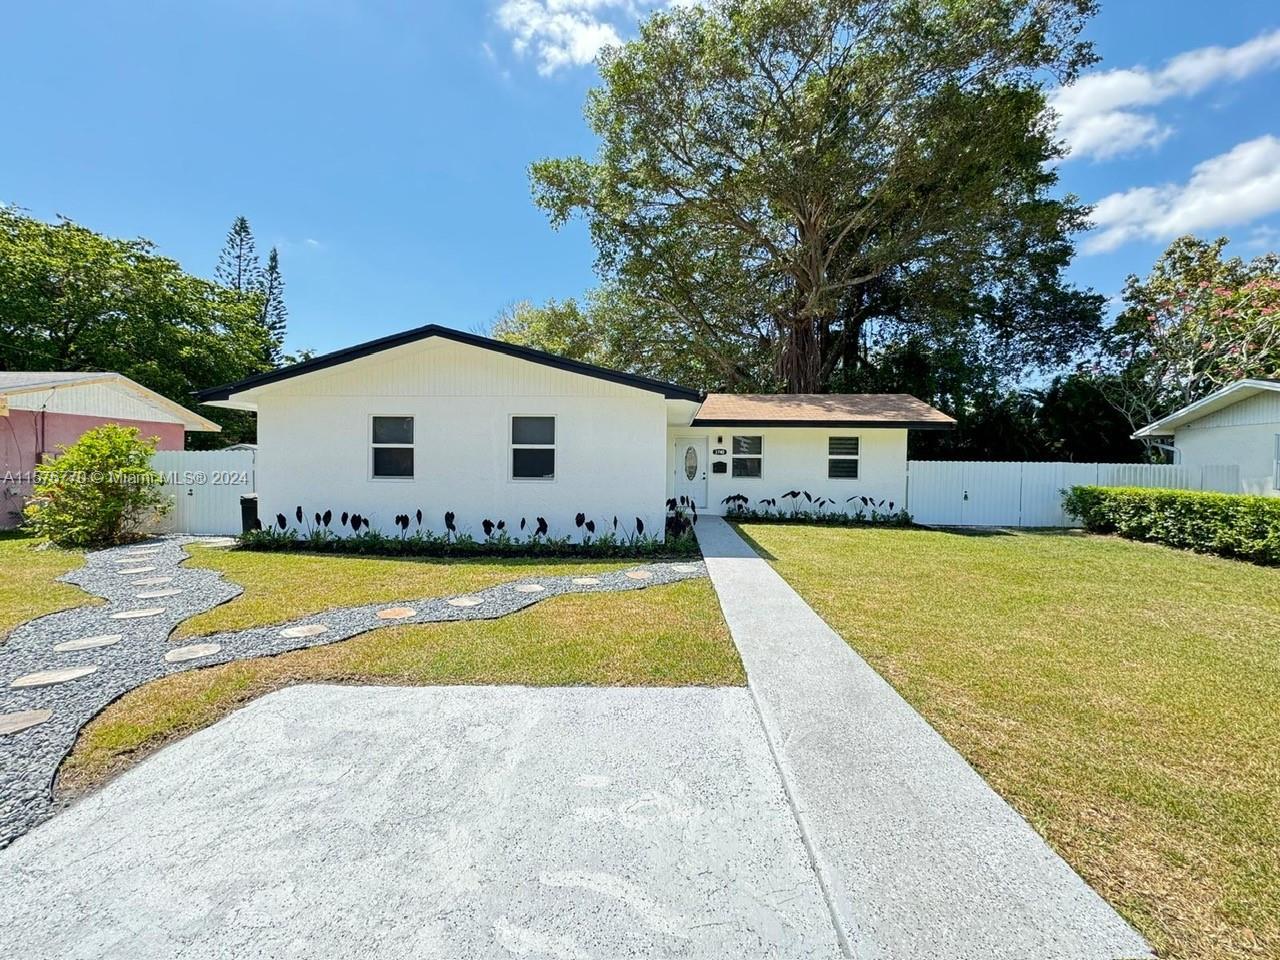 BEAUTIFUL, COMPLETELY REMODELED 3/2 IN COCONUT GROVE!!! IMPACT WINDOWS, NEW FLOORS, NEW KITCHEN WITH